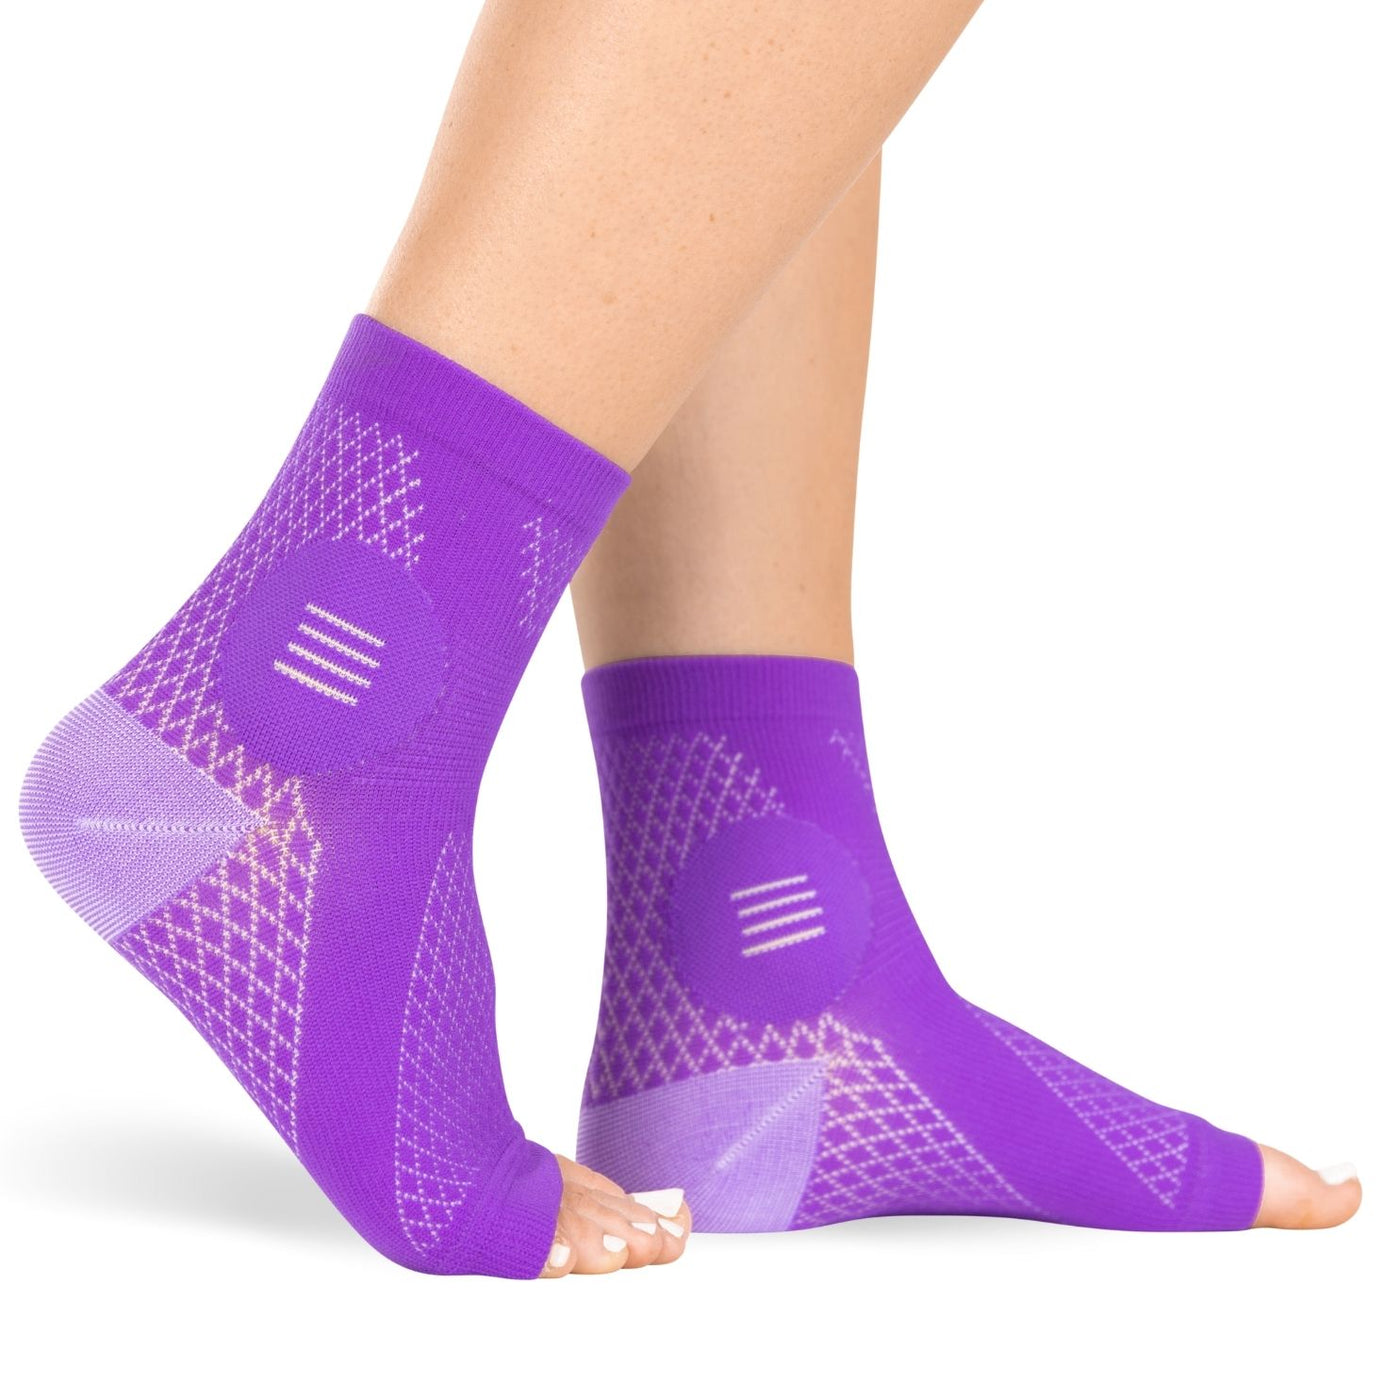 The BraceAbility purple compression neuropathy socks give quick relief from painful peripheral neuropathy and nerve damage with these socks for diabetic foot pain.